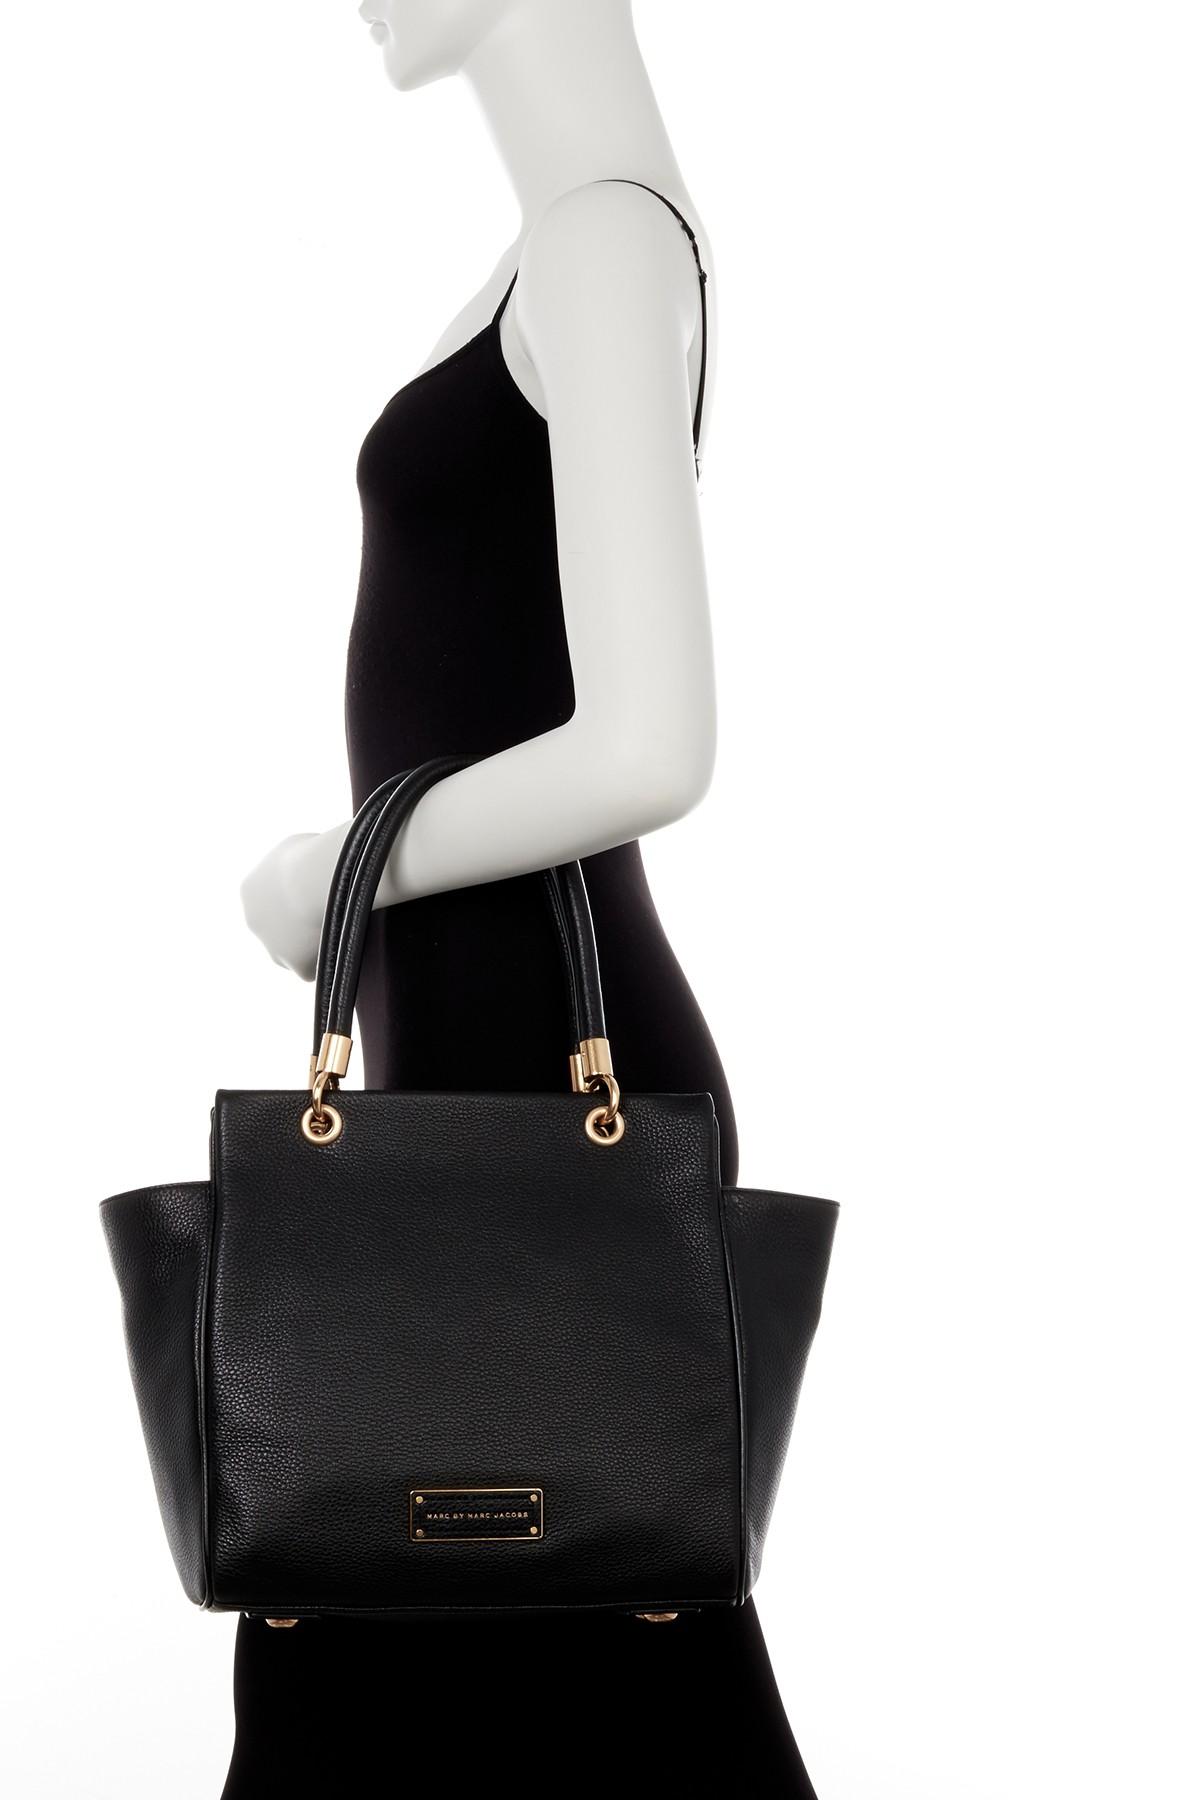 Marc By Marc Jacobs Bentley Leather Winged Double Shoulder Bag in Black - Lyst